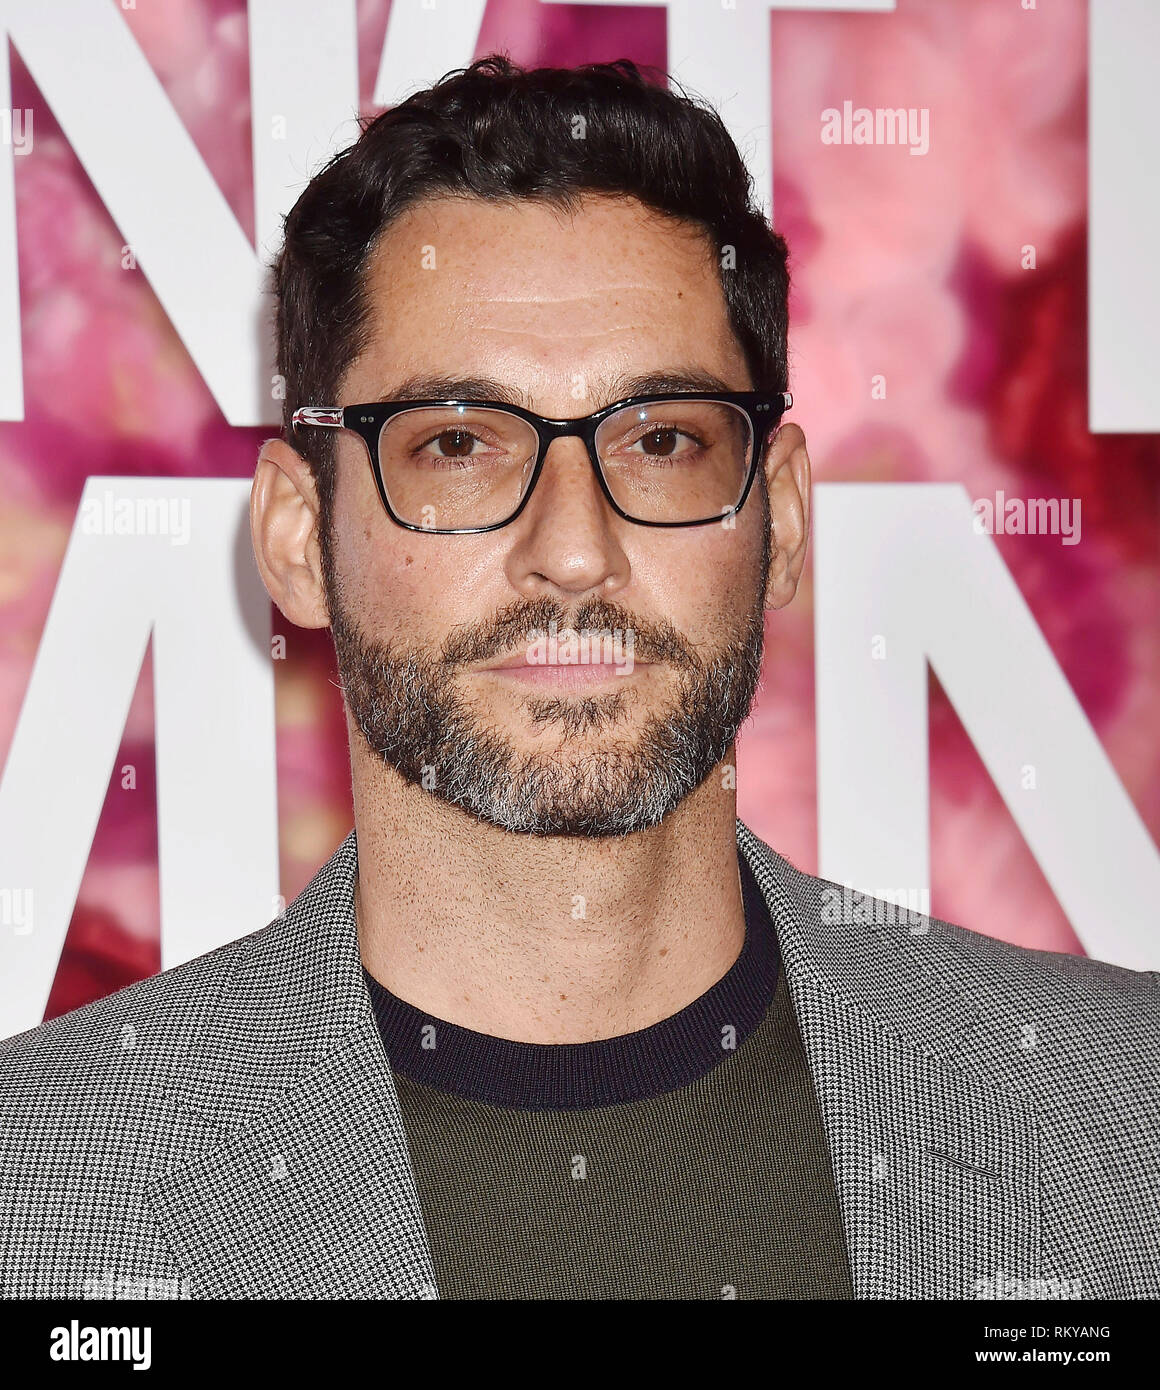 LOS ANGELES, CA - FEBRUARY 11: Tom Ellis arrives at the Premiere Of Warner Bros. Pictures' 'Isn't It Romantic' at The Theatre at Ace Hotel on February Stock Photo